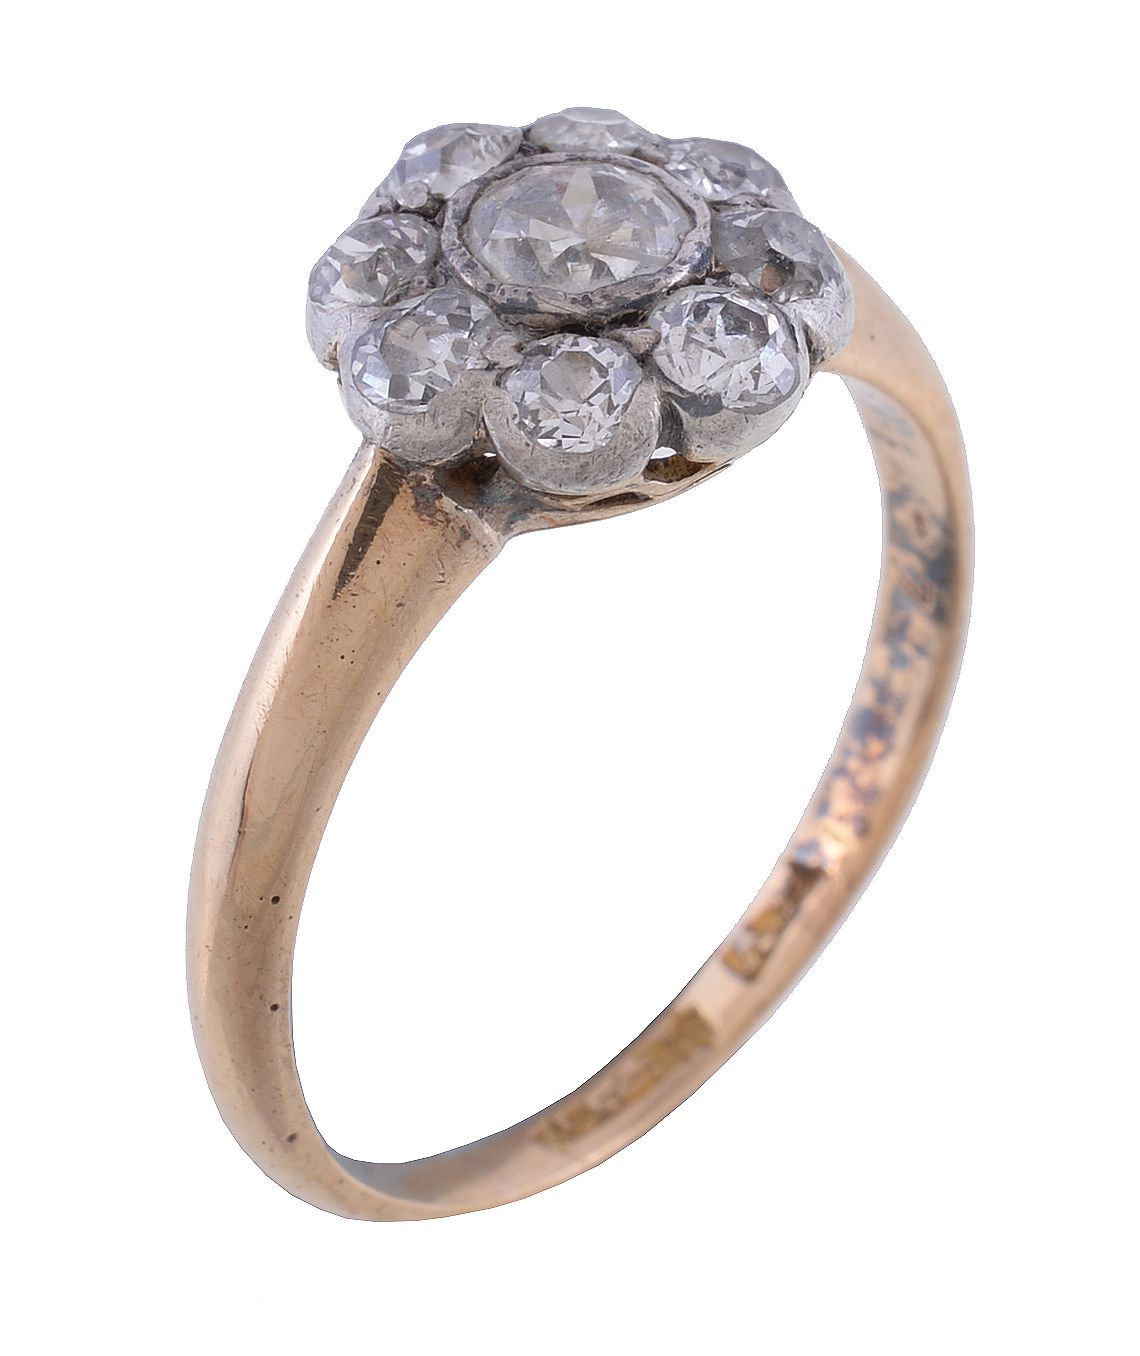 A 1940s diamond cluster ring , set with old brilliant cut diamonds, approximately 0.65 carats